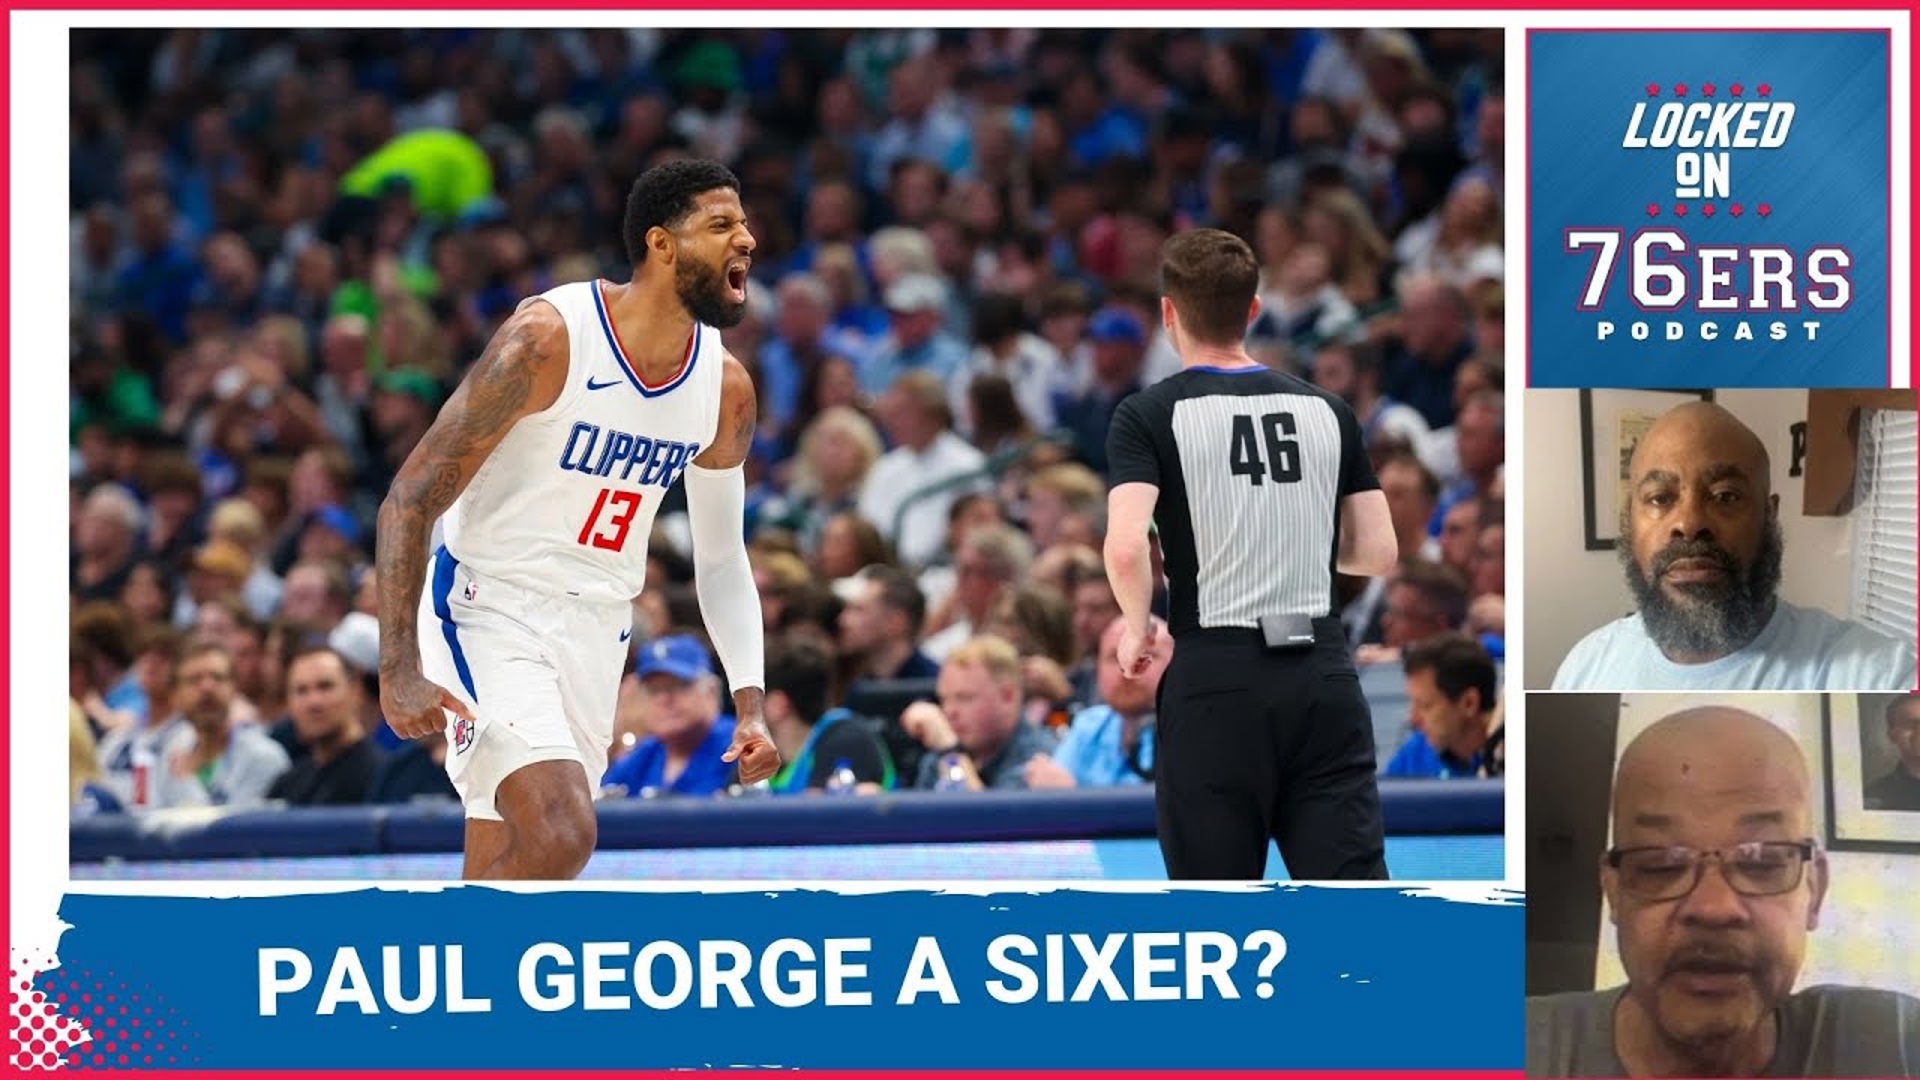 Sixers believed to be frontrunners for Paul George